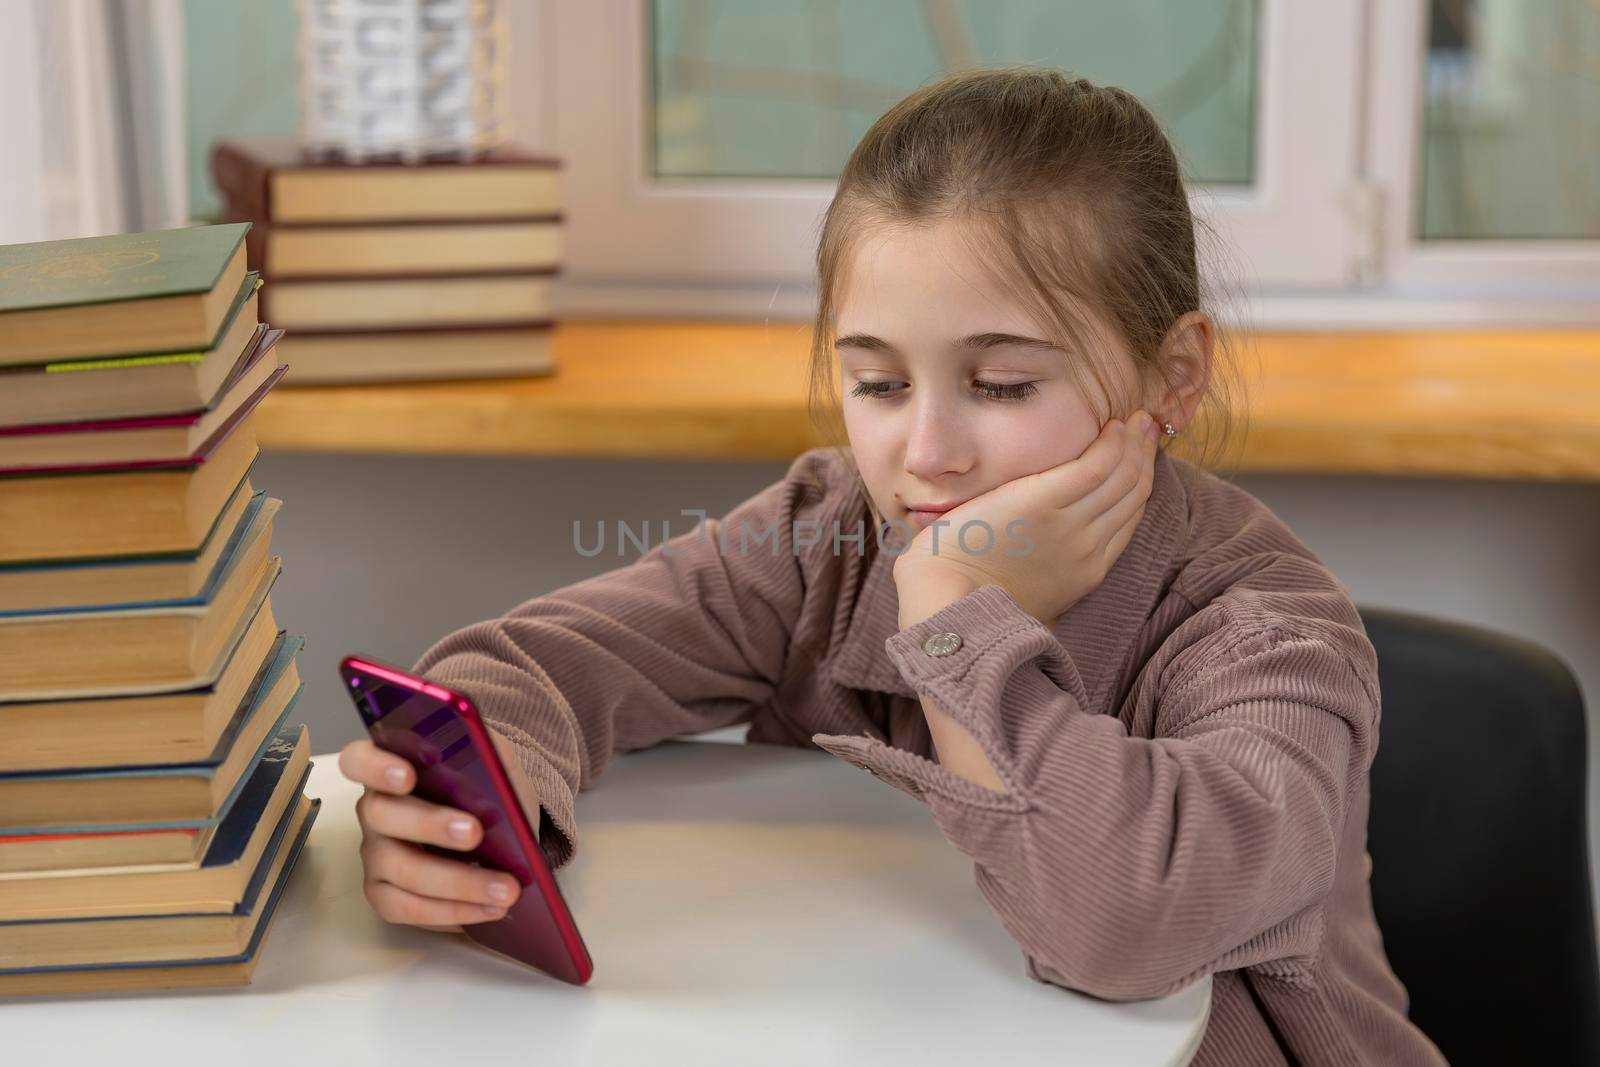 girl sits at a table on which there are books and looks at the phone